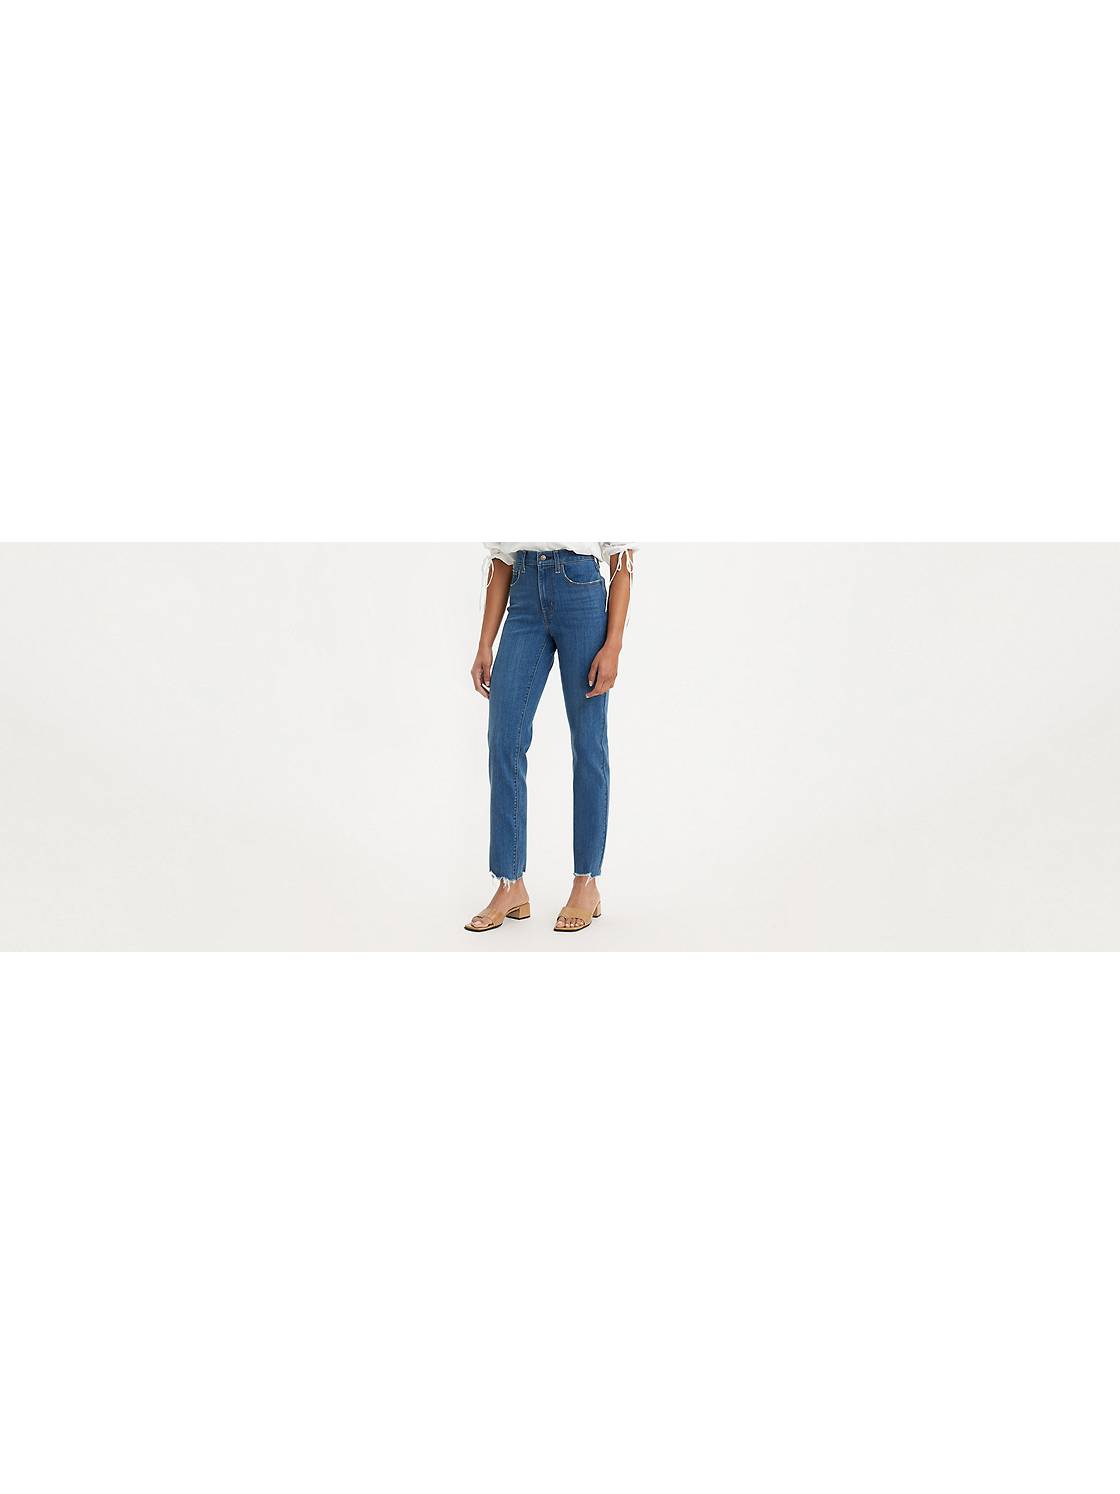 Levi's High Waisted Taper Jeans In Light Wash Blue, 60% OFF